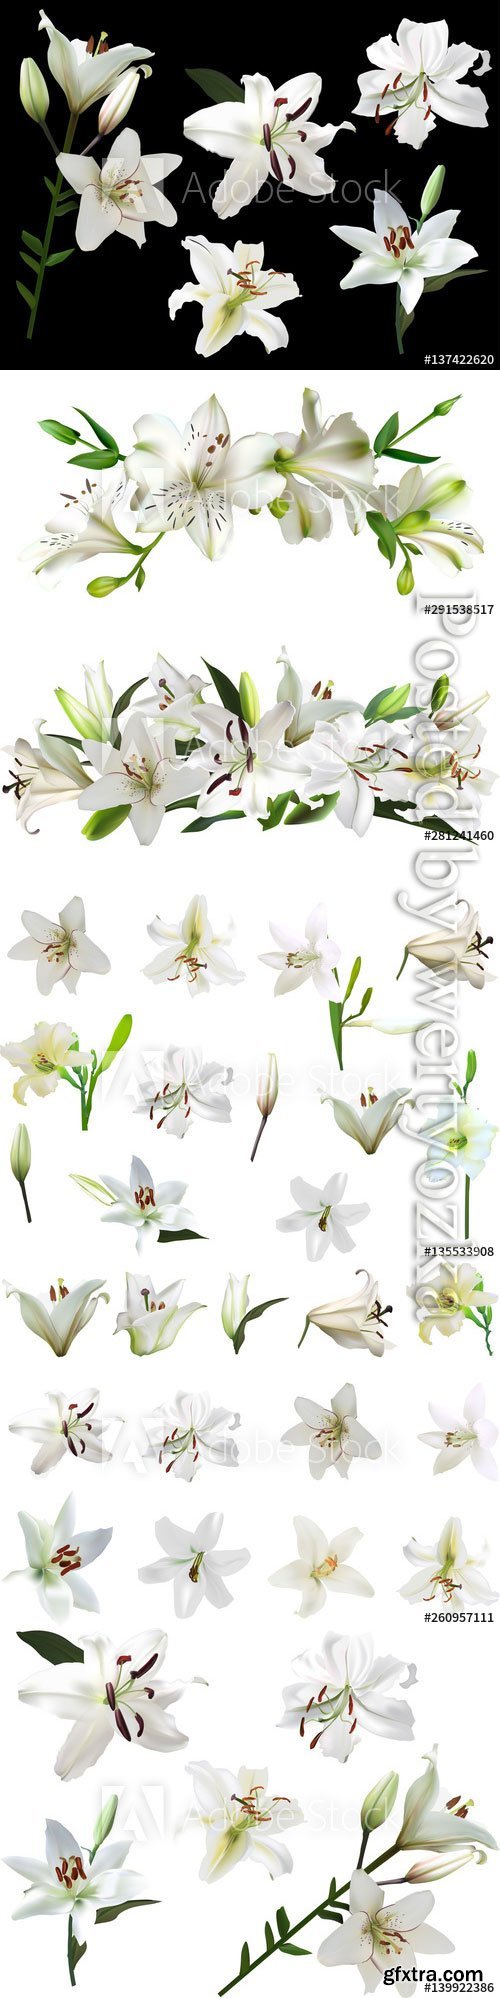 White lilies with green buds, beautiful flowers in vector